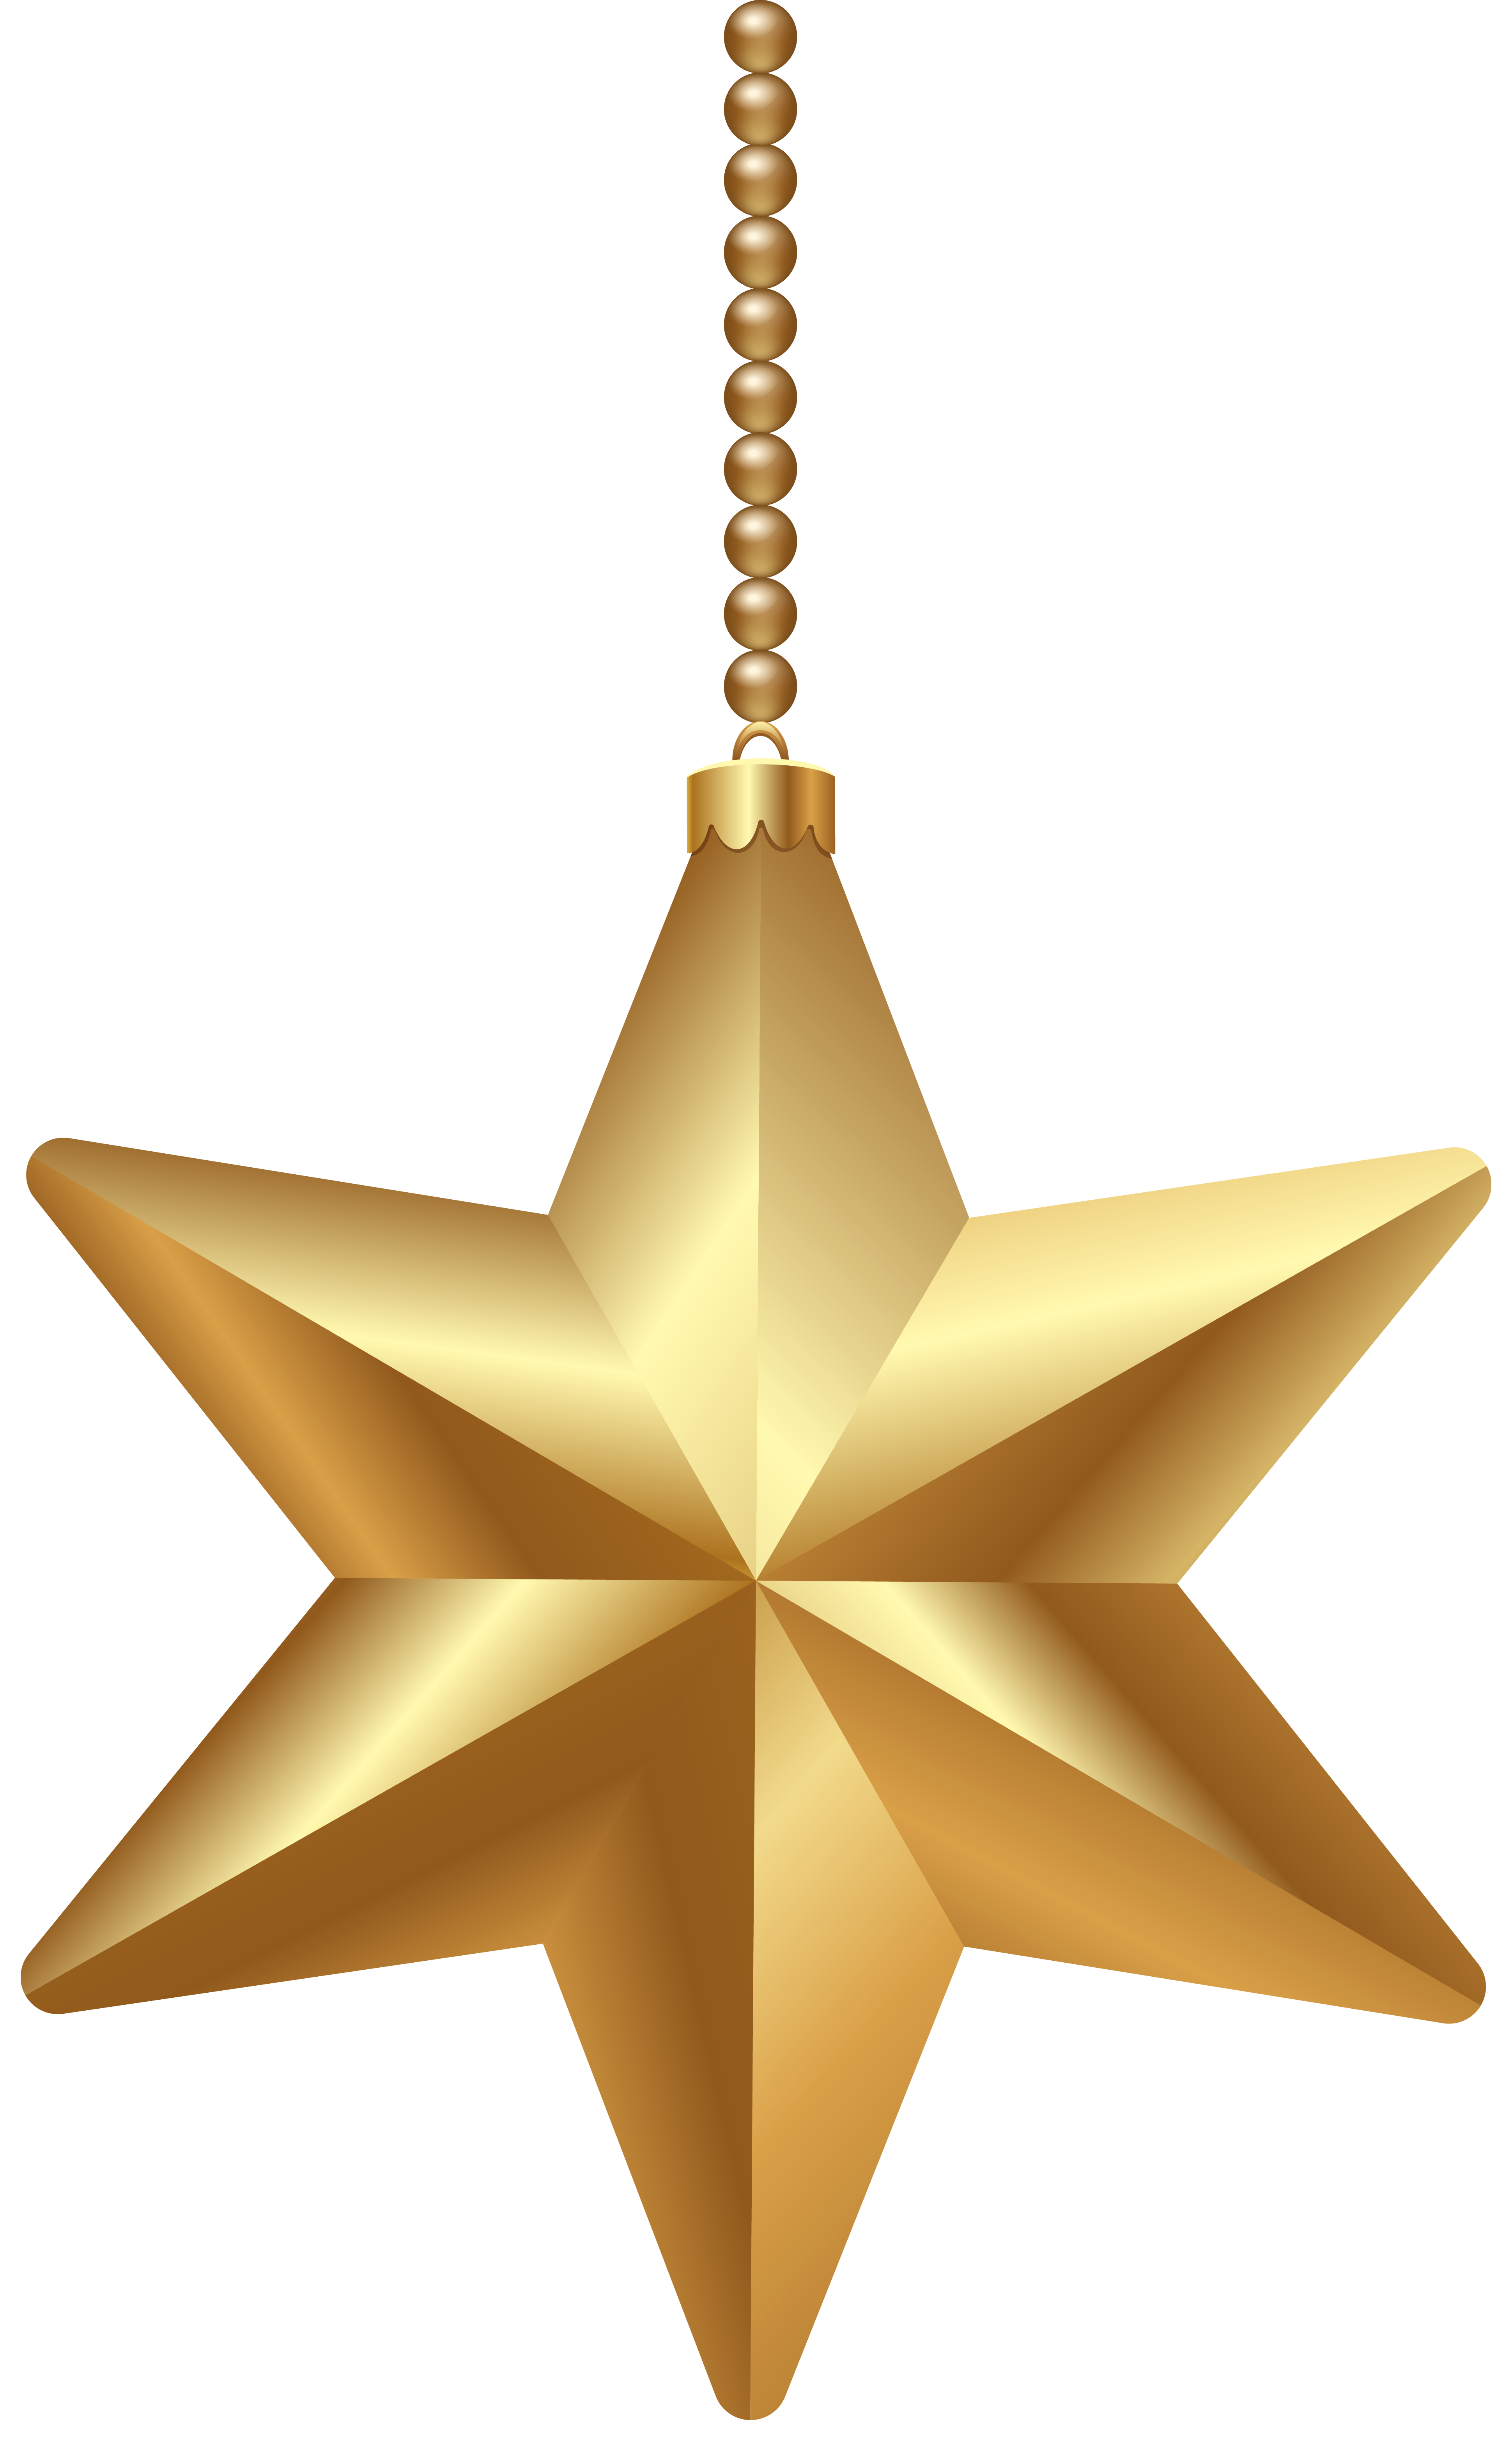 Gold Christmas Star PNG Clipart Image | Gallery Yopriceville - High ...